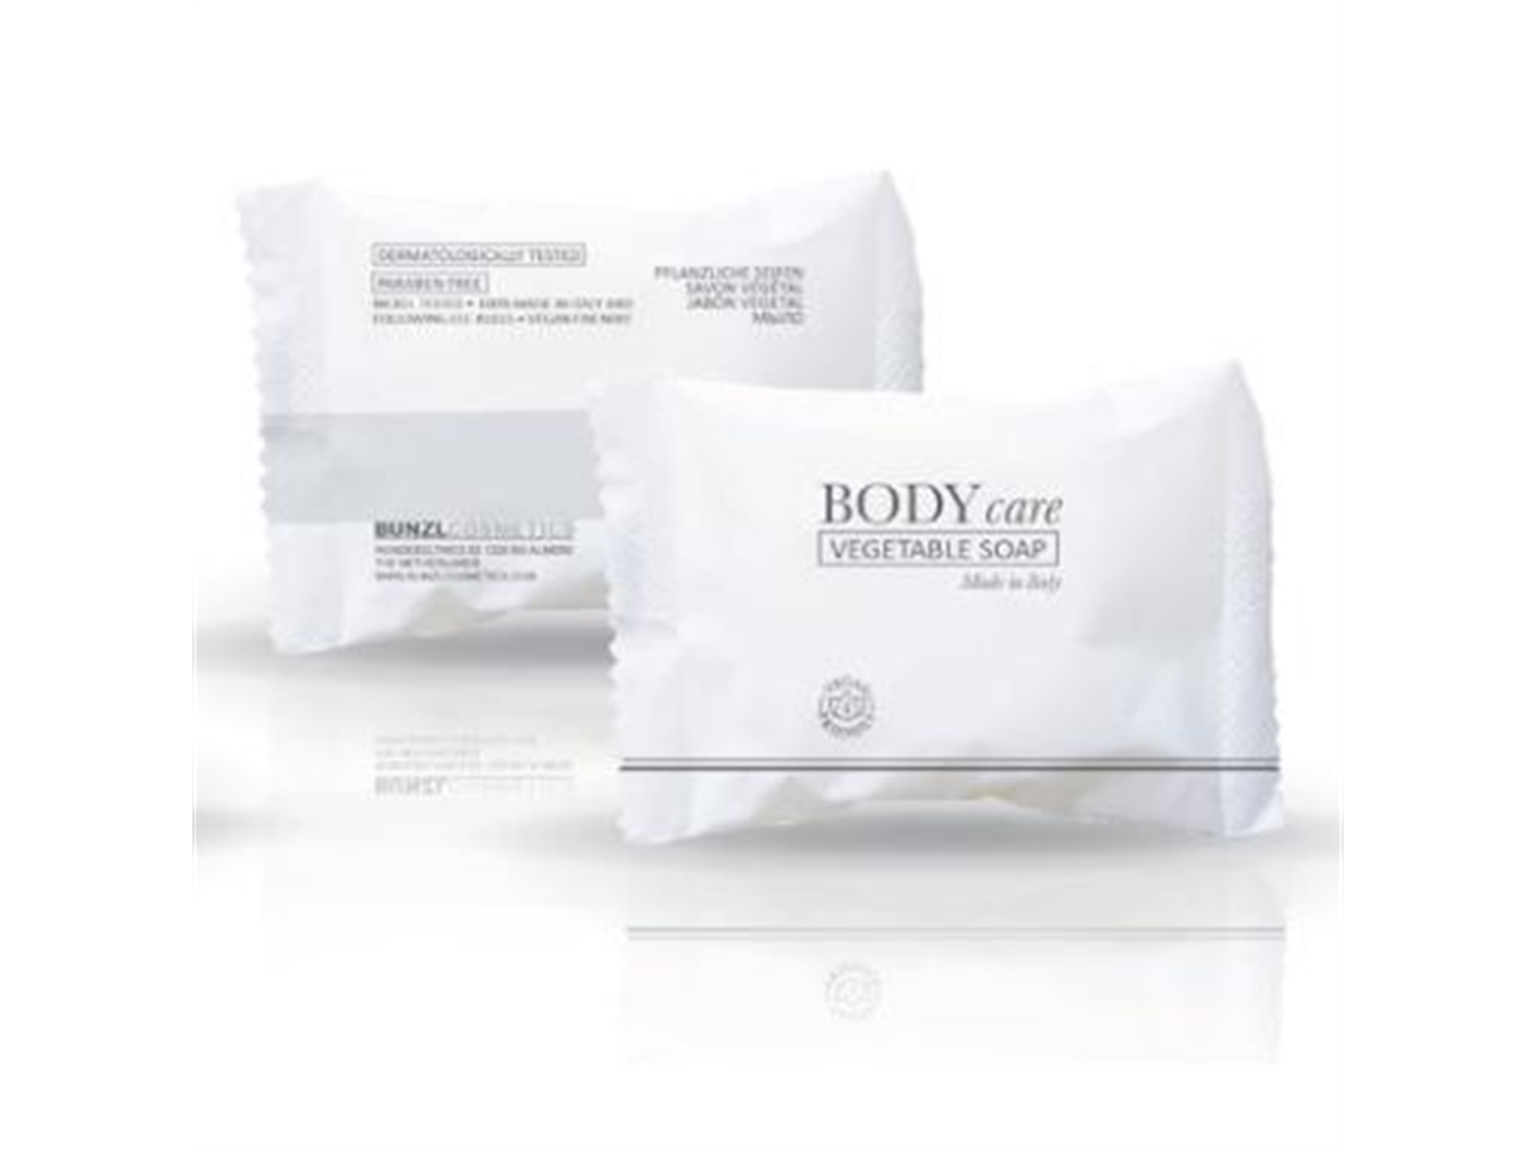 BODY CARE SEIFE  20 g, Body Care Collection